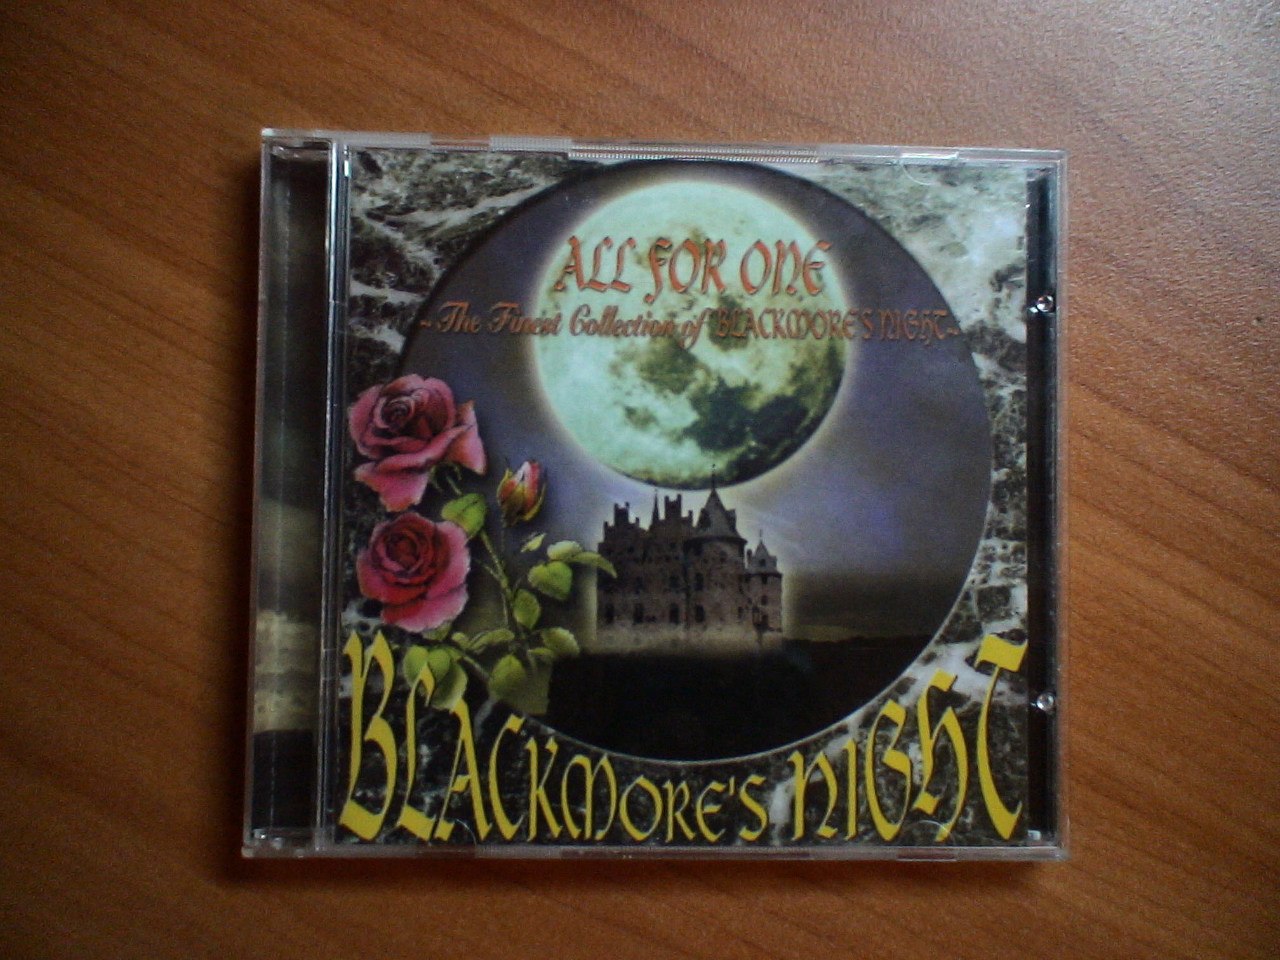 All For One & One For All | Blackmore's Night